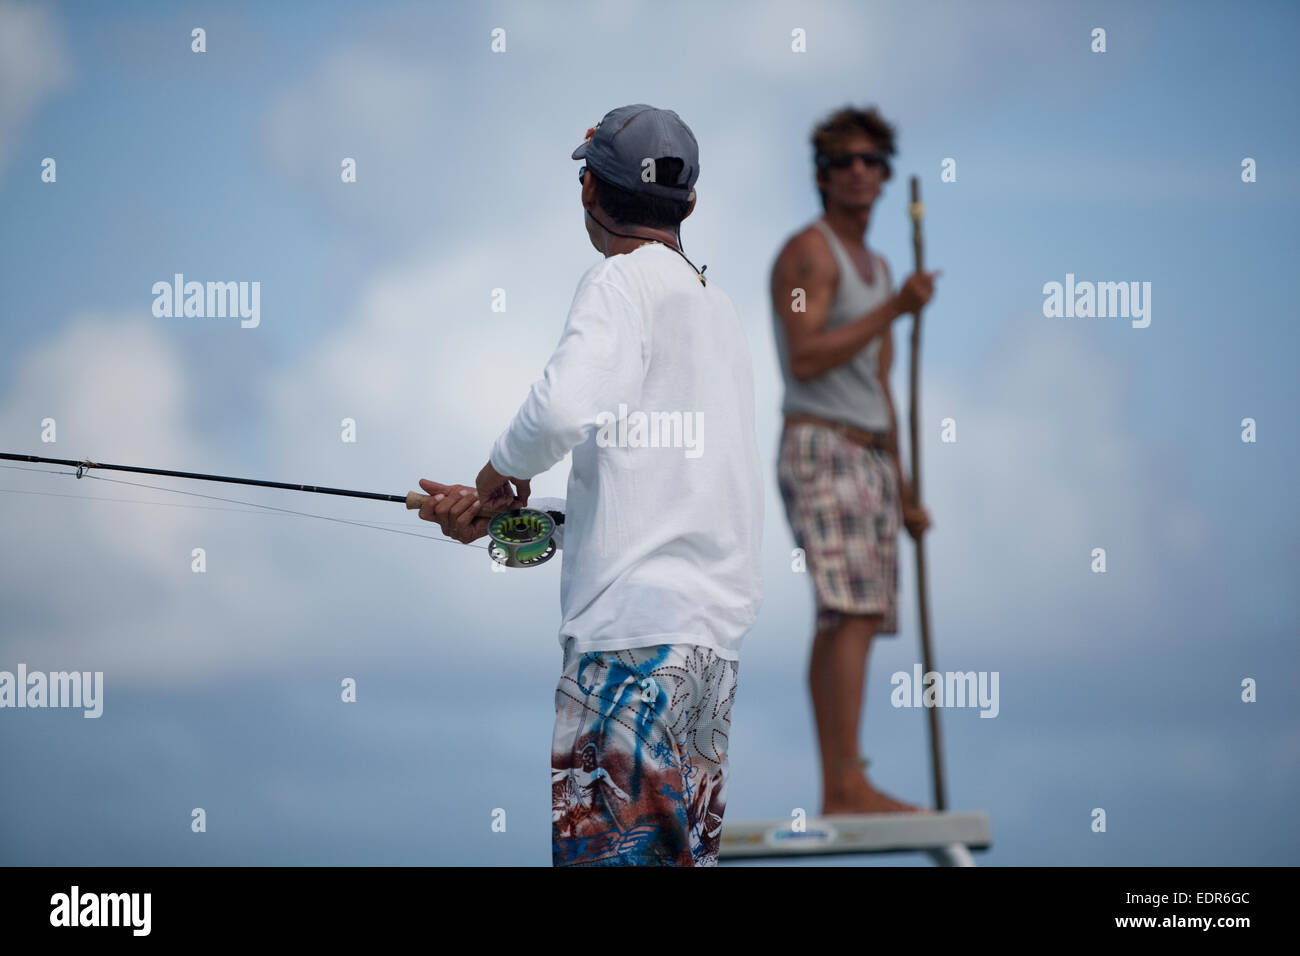 fisherman reels fly rod while man in back uses pole to stear boat Stock Photo